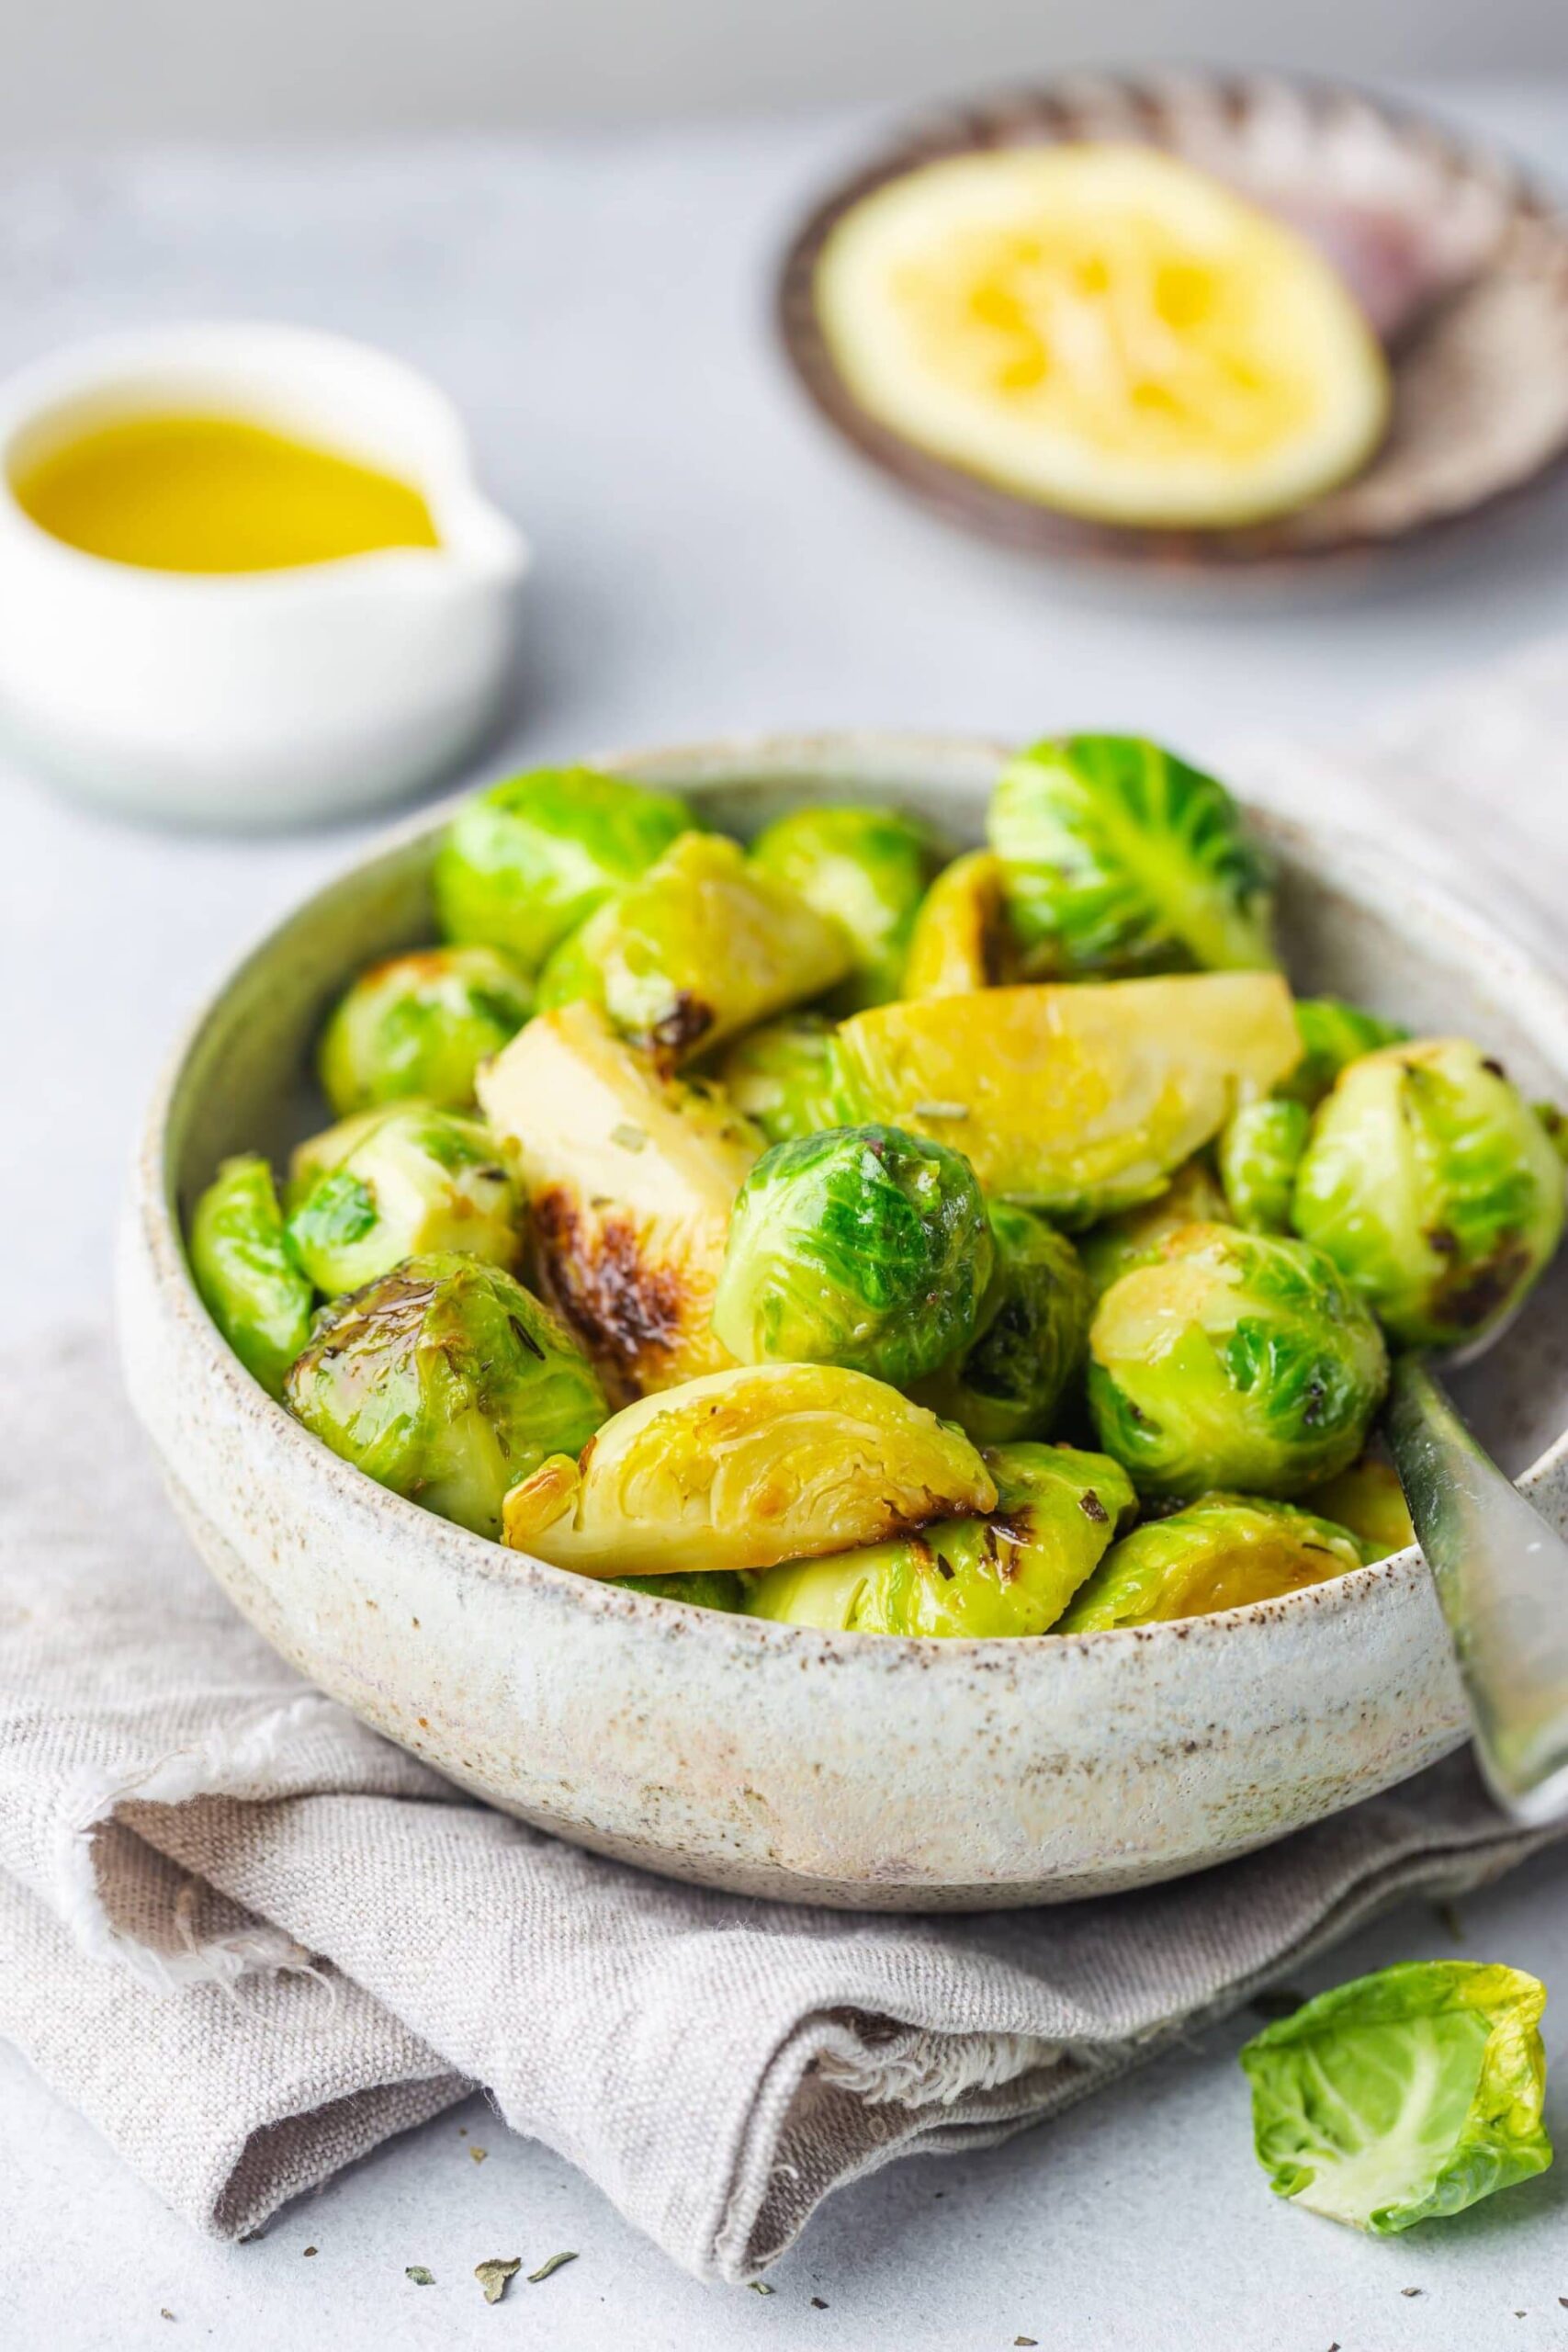 How to Roast Brussels Sprouts | Real Food RN